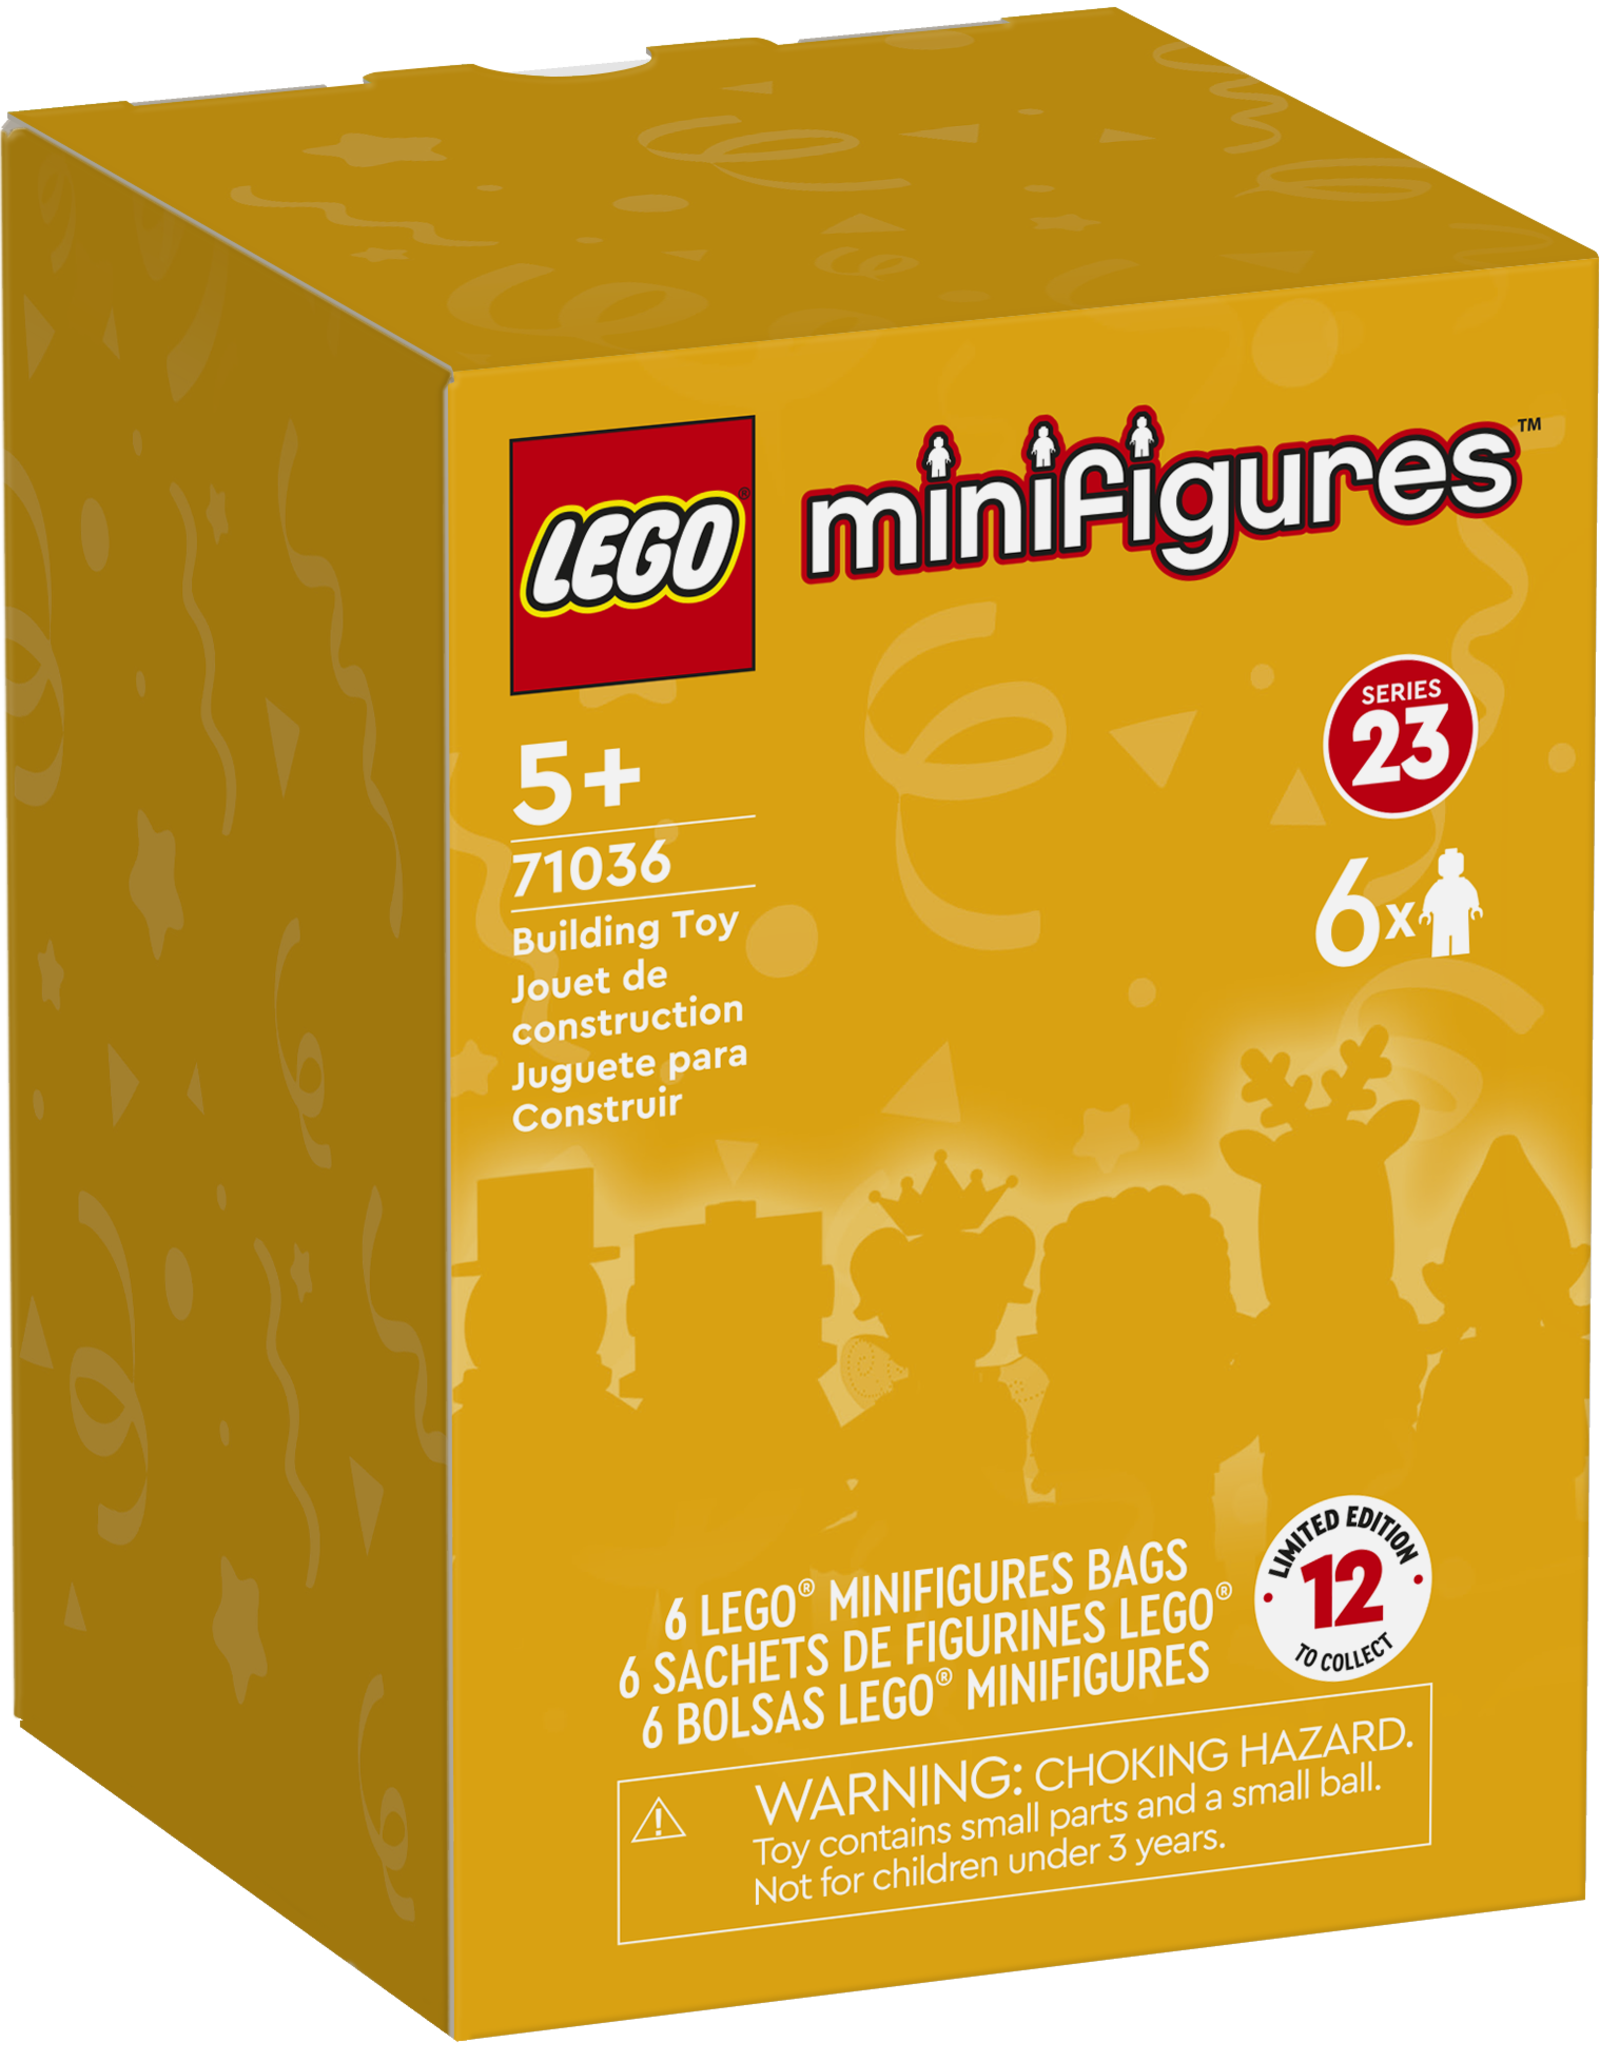 LEGO Minifigures 71036 Series 23 - 6 pack